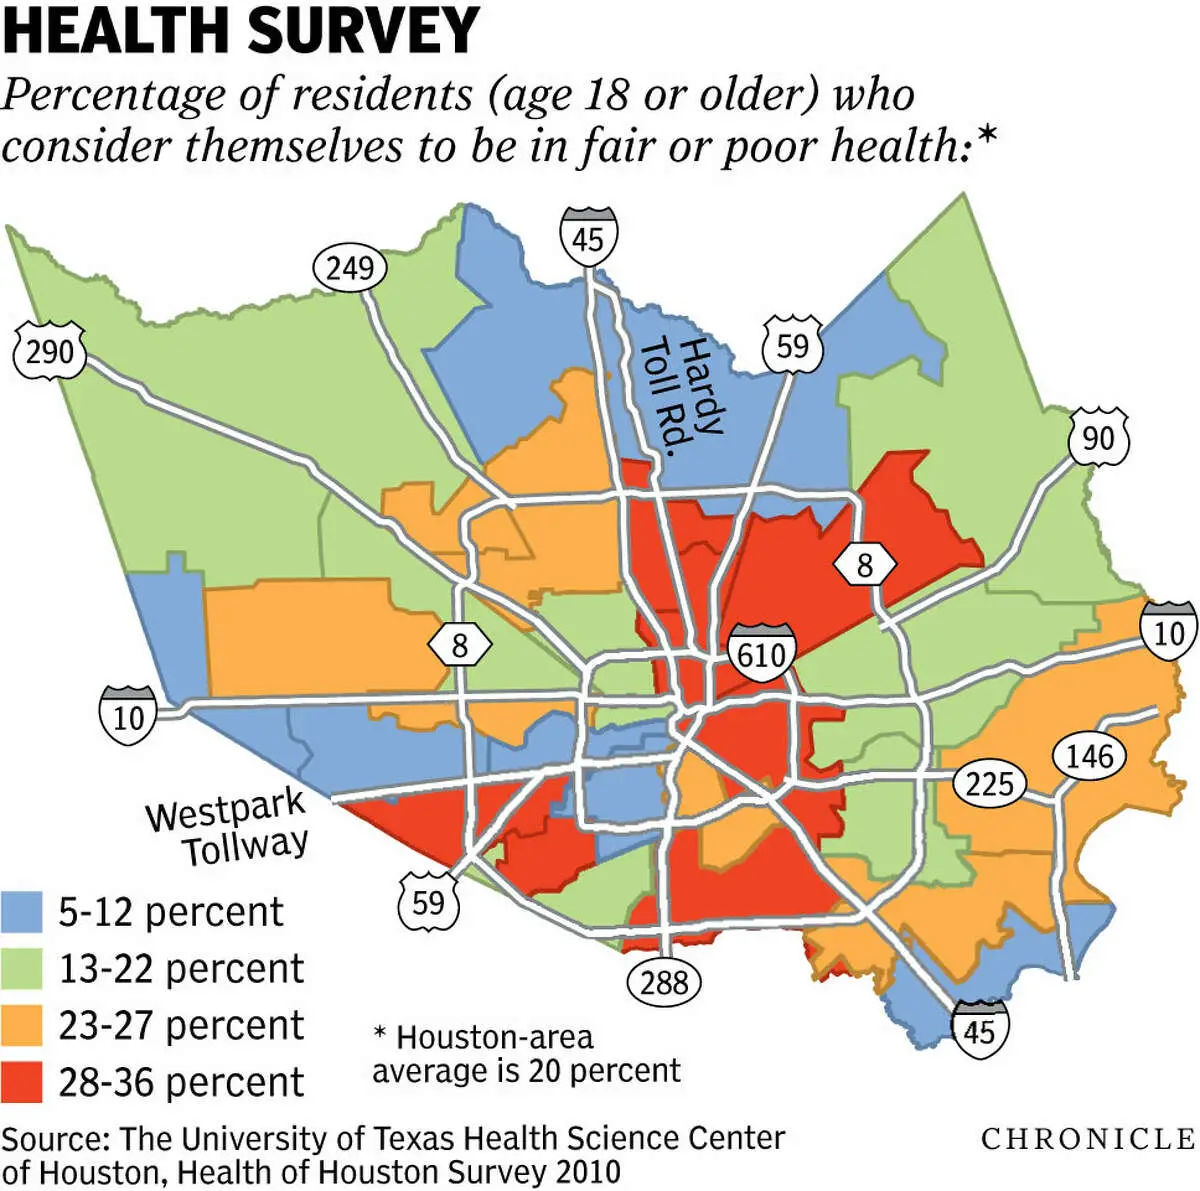 Survey finds Houstonian health worse than national average